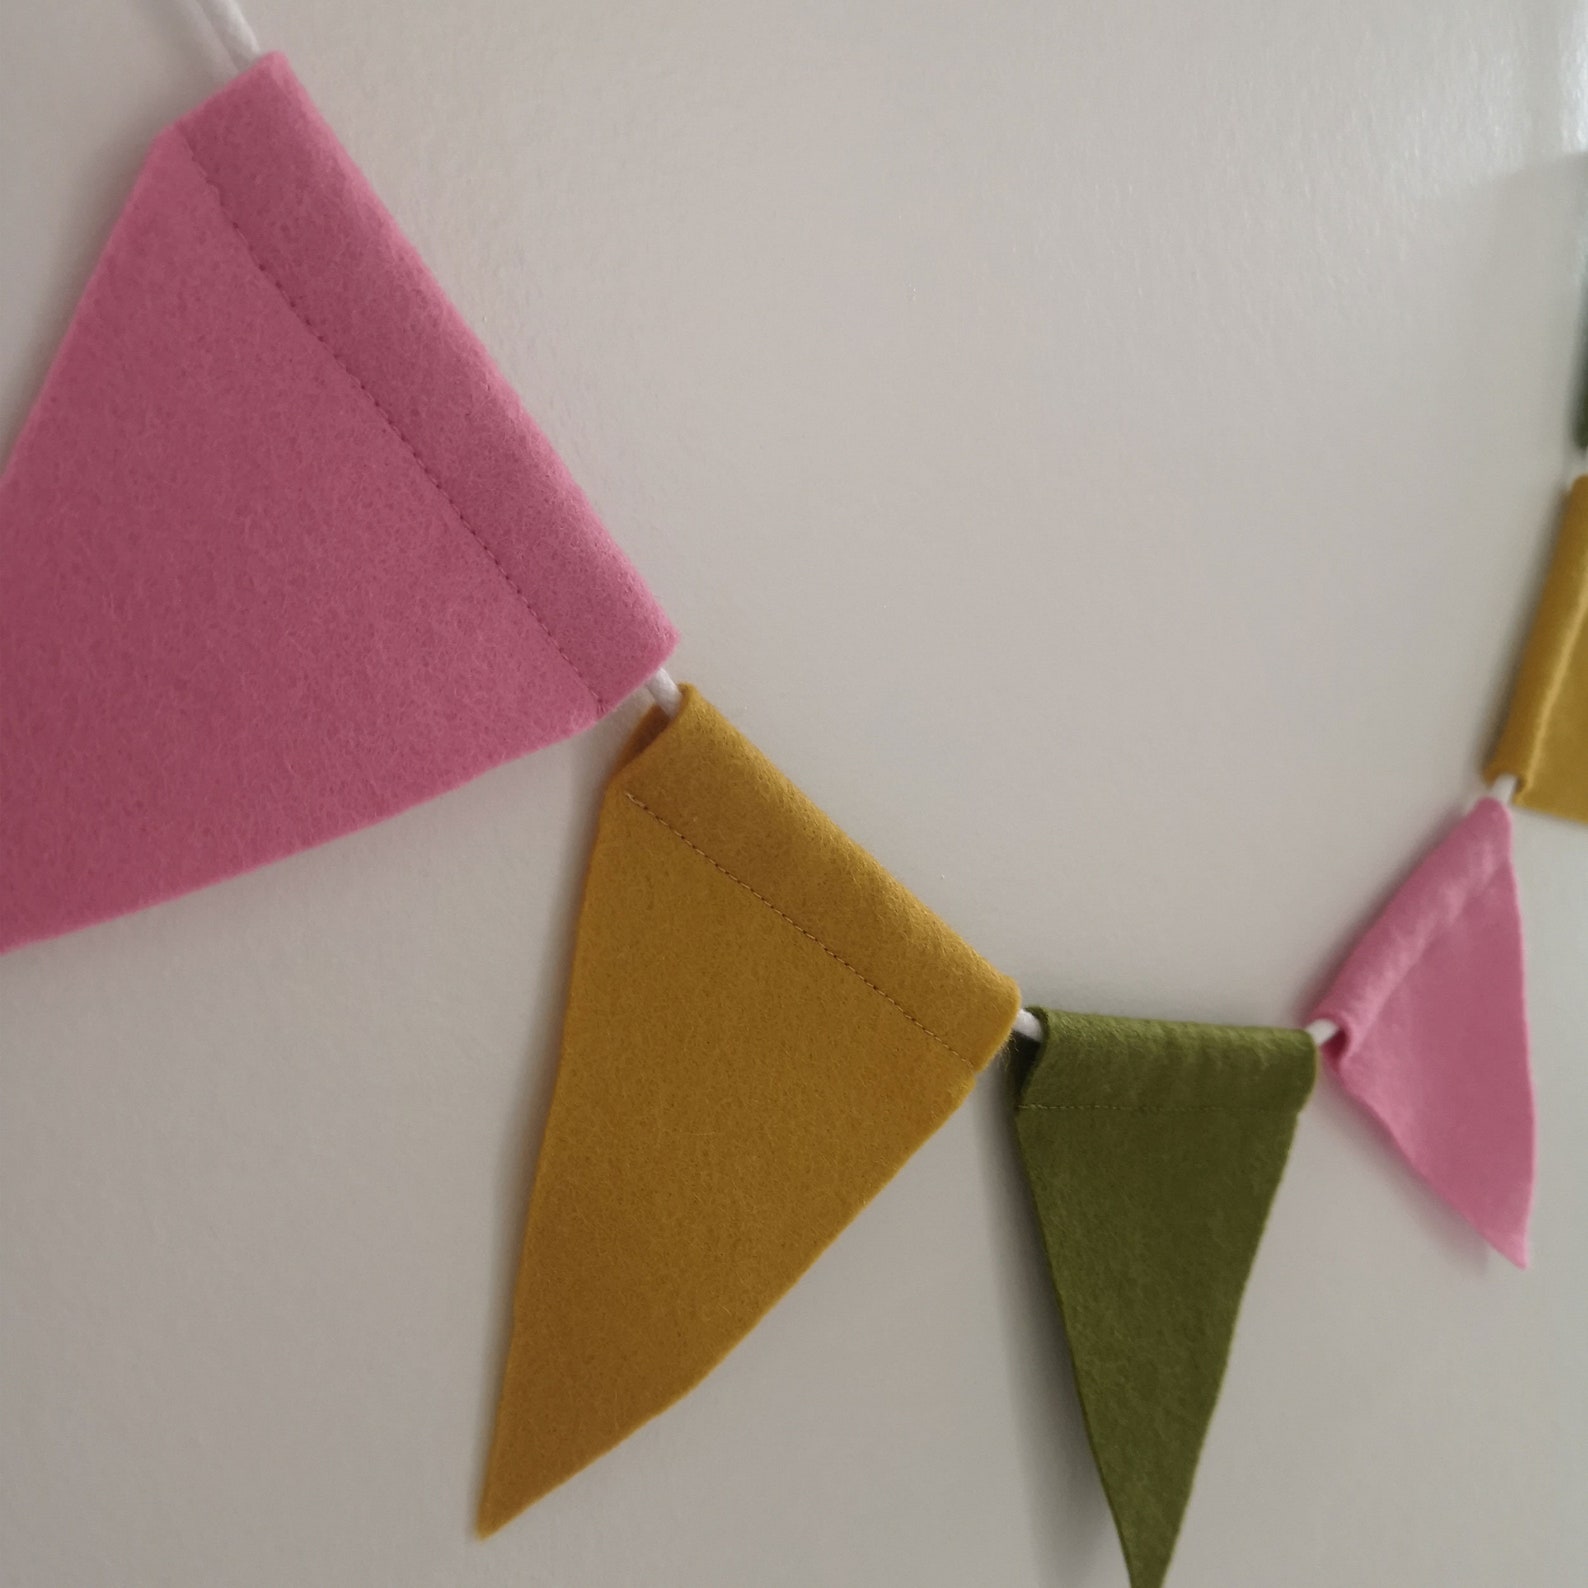 Personalized Bunting Garland, Baby Room Bunting, Customizable Felt ...